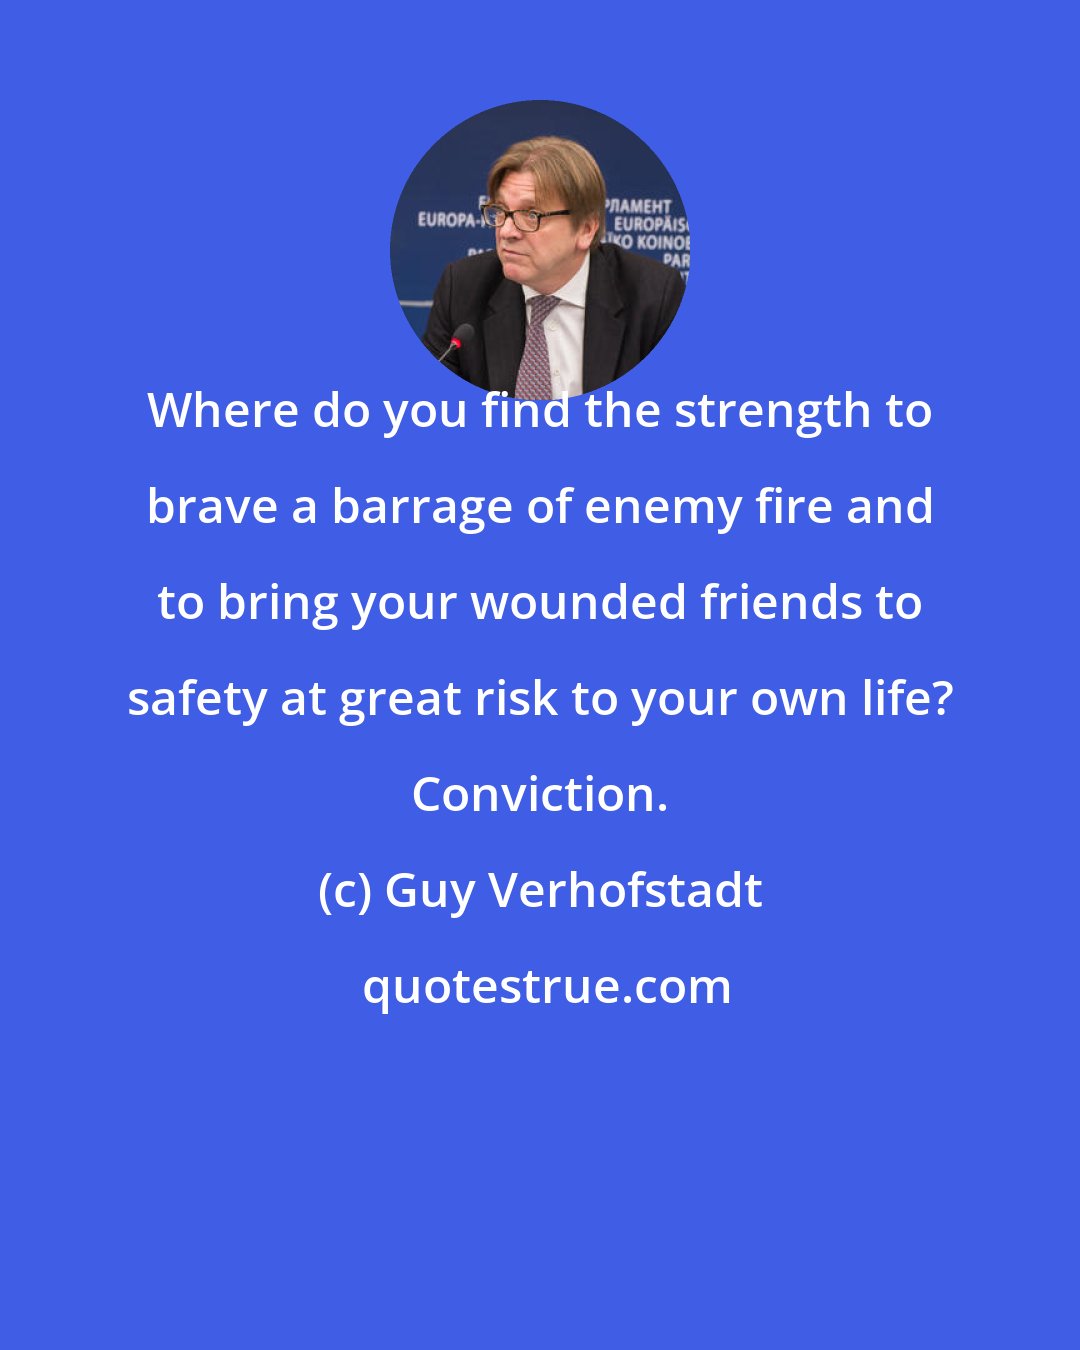 Guy Verhofstadt: Where do you find the strength to brave a barrage of enemy fire and to bring your wounded friends to safety at great risk to your own life? Conviction.